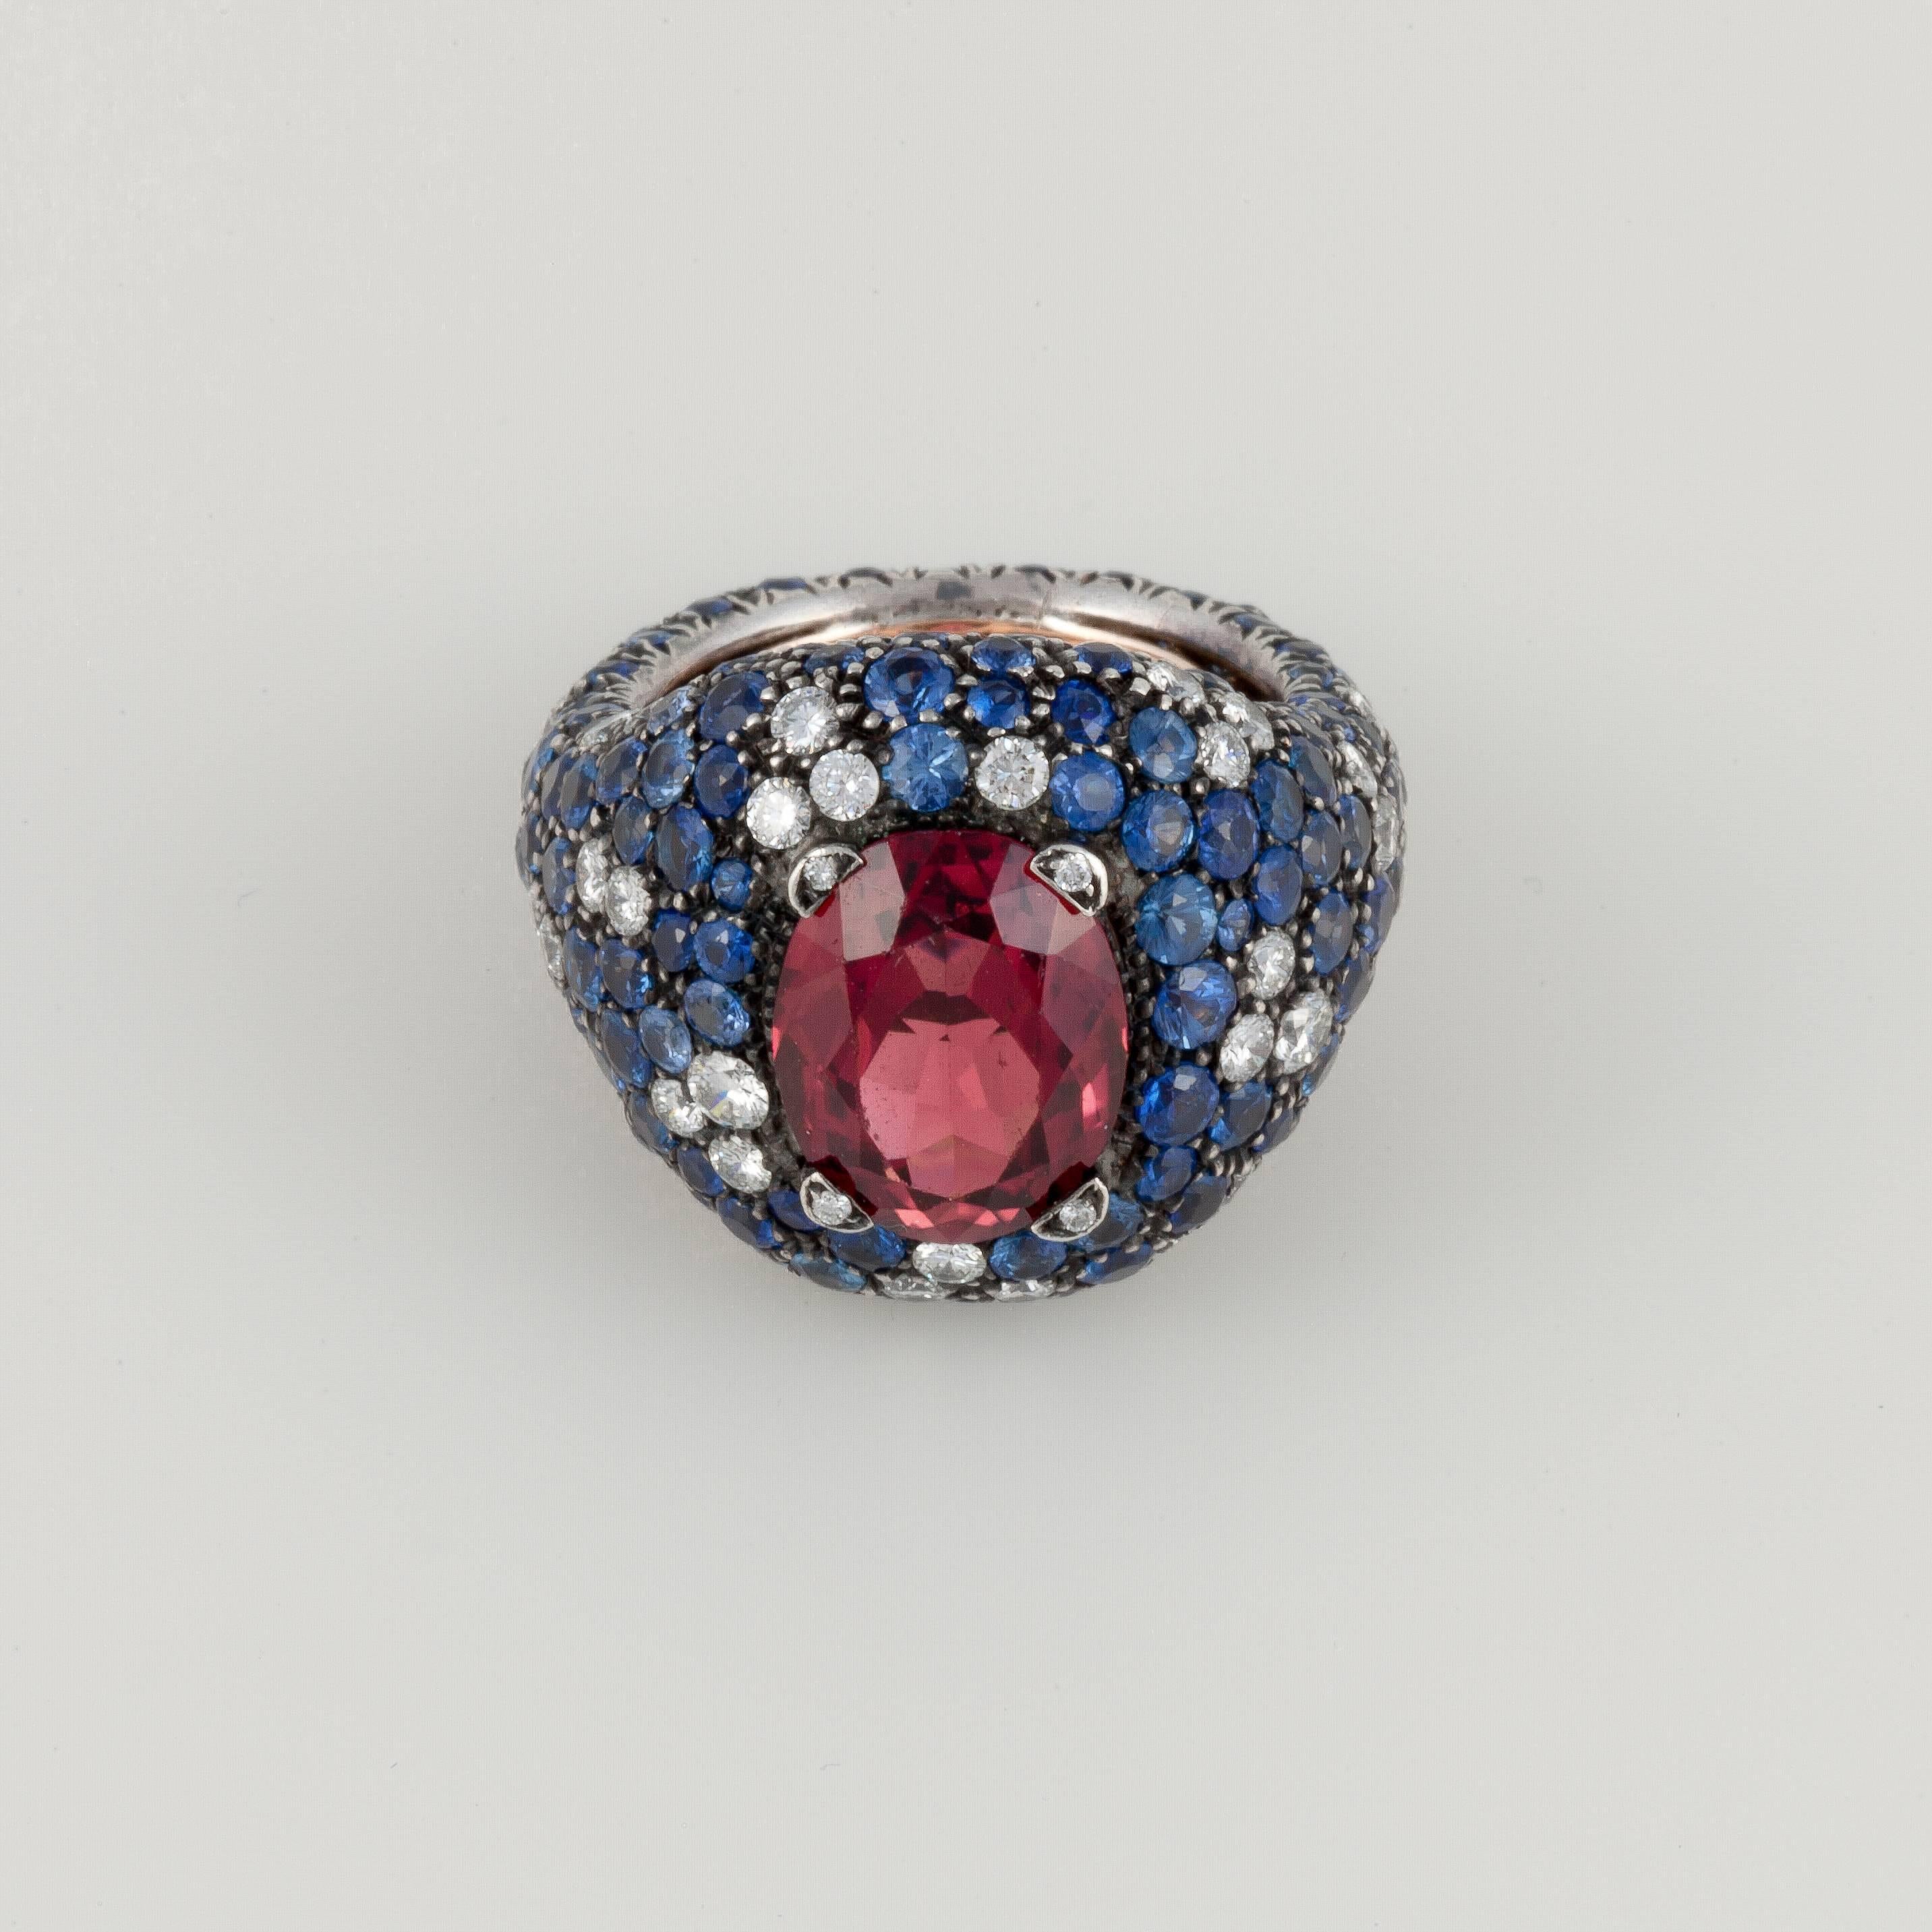 This dome style ring composed of 18K yellow gold and stainless steel features an oval rubellite stone surrounded by round blue sapphires and diamonds.  The rubellite totals 5 carats and is accented by 8 carats of sapphires and 2.50 carats of